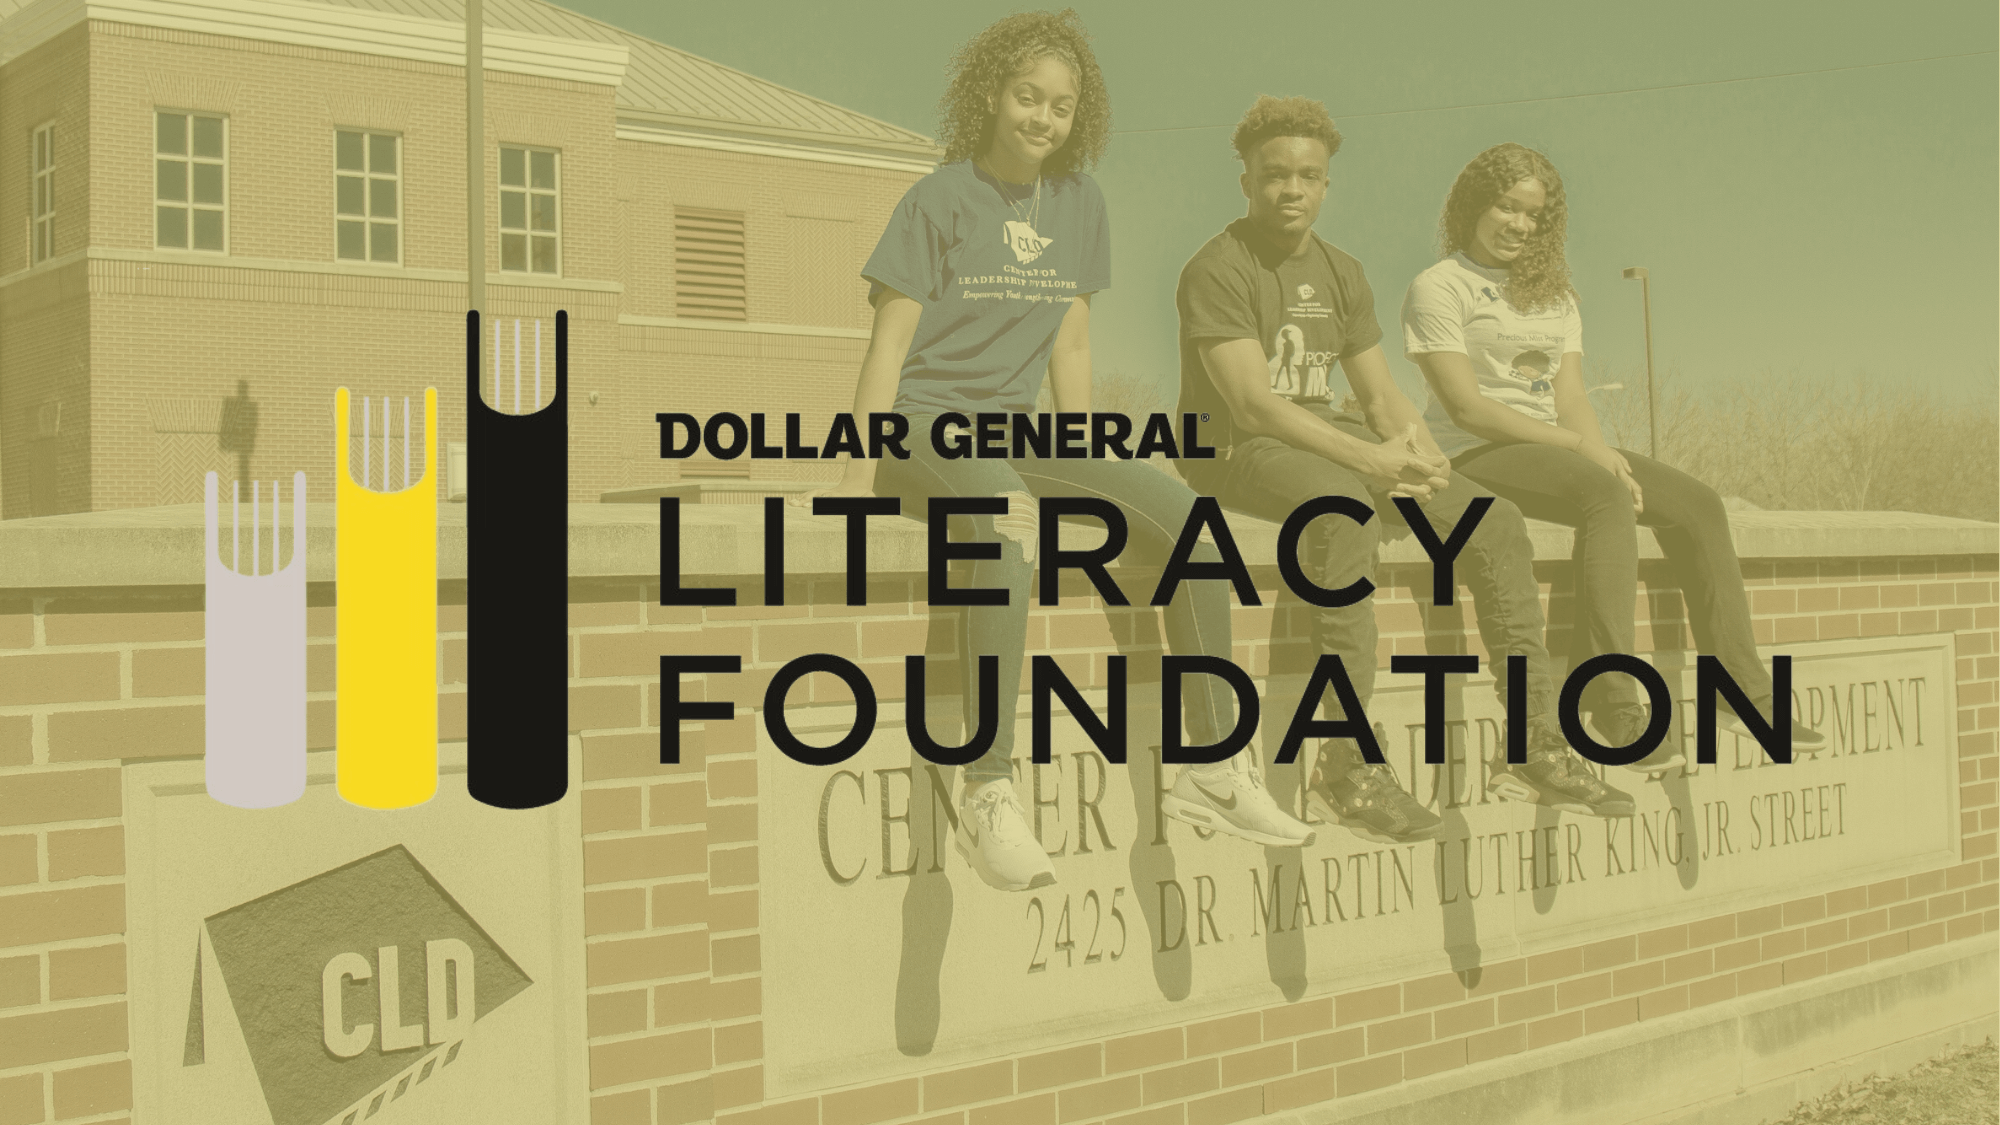 Center for Leadership Development Receives $5,000 Grant from the Dollar General Literacy Foundation to Support Summer Literacy